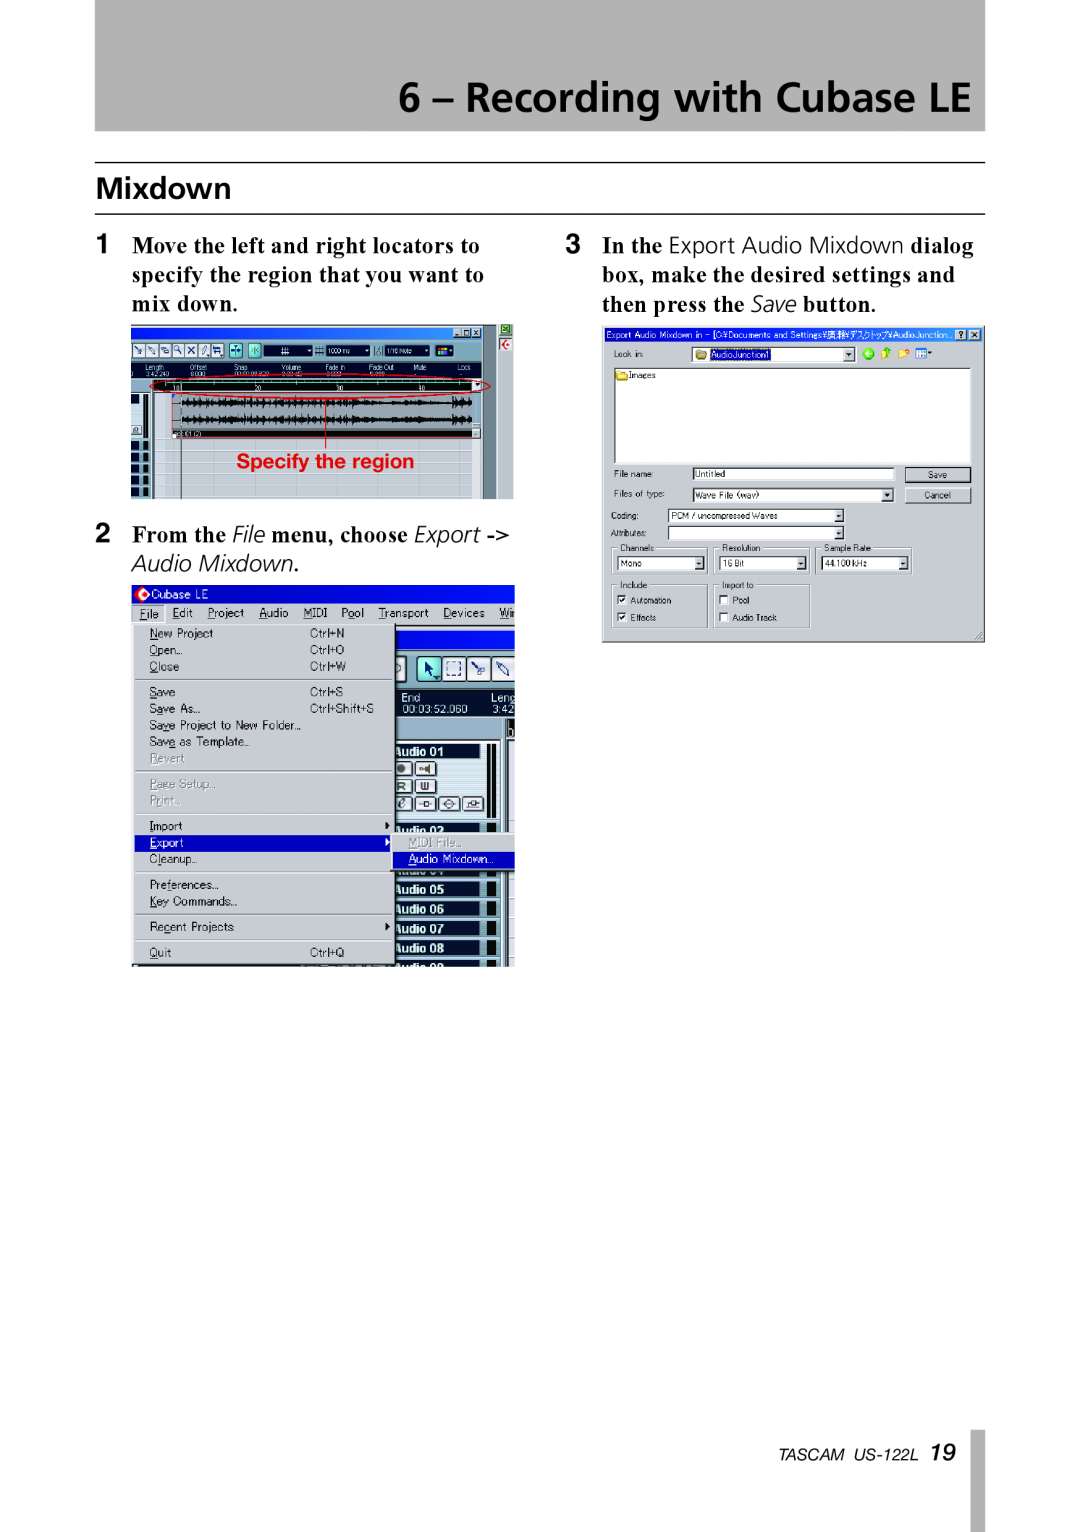 Tascam US-122L Recording with Cubase LE, From the File menu, choose Export - Audio Mixdown, Specify the region 